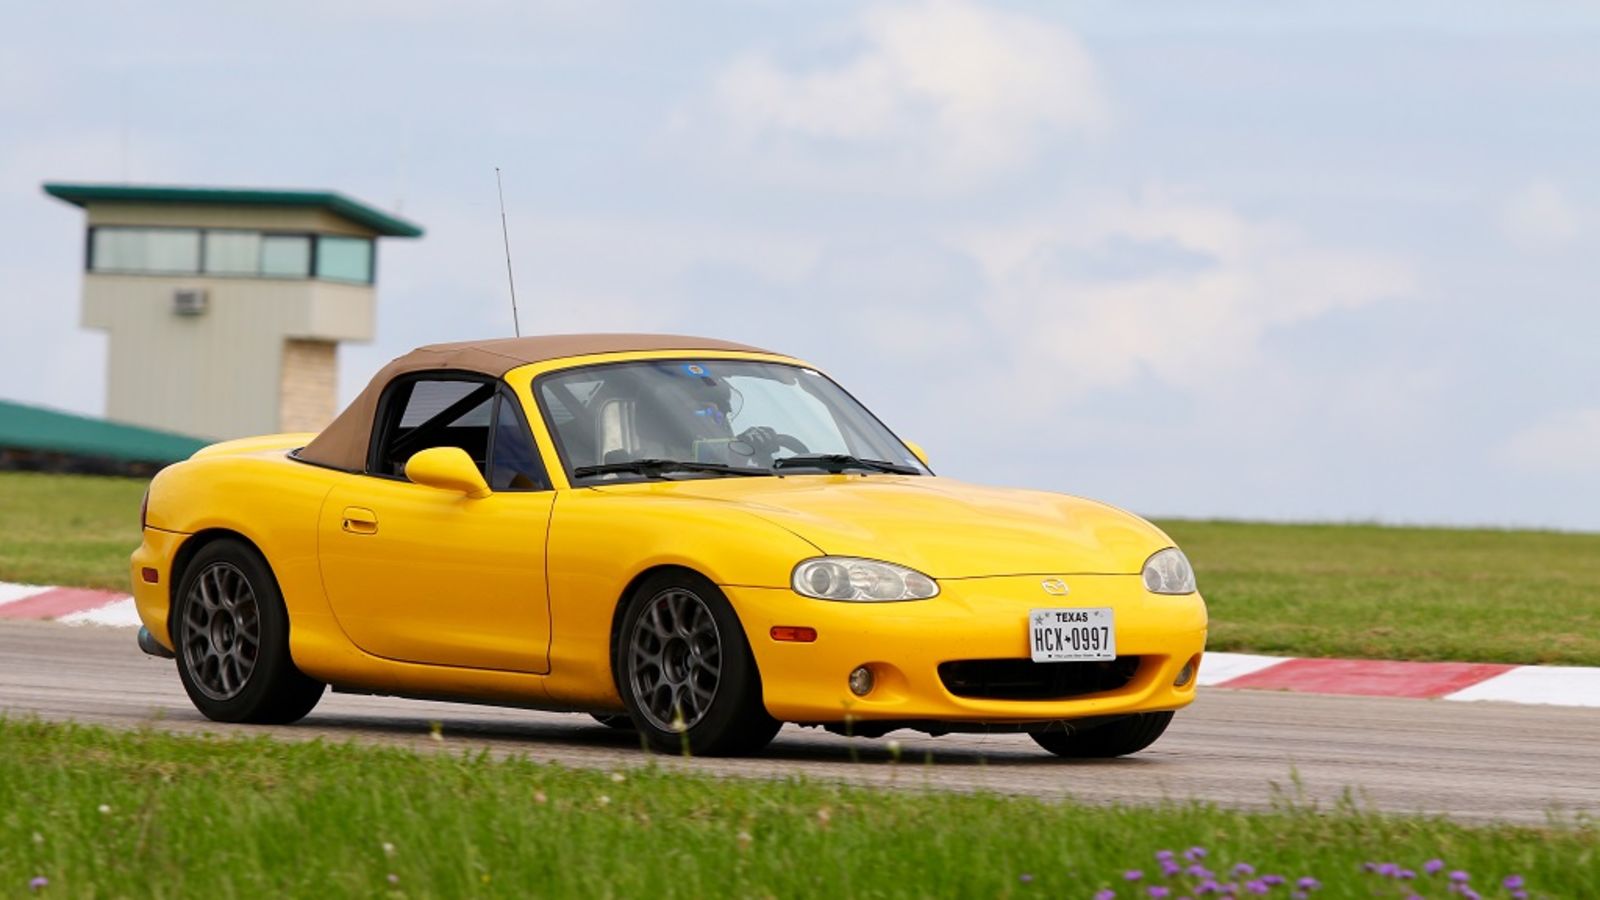 Illustration for article titled Miata search continues